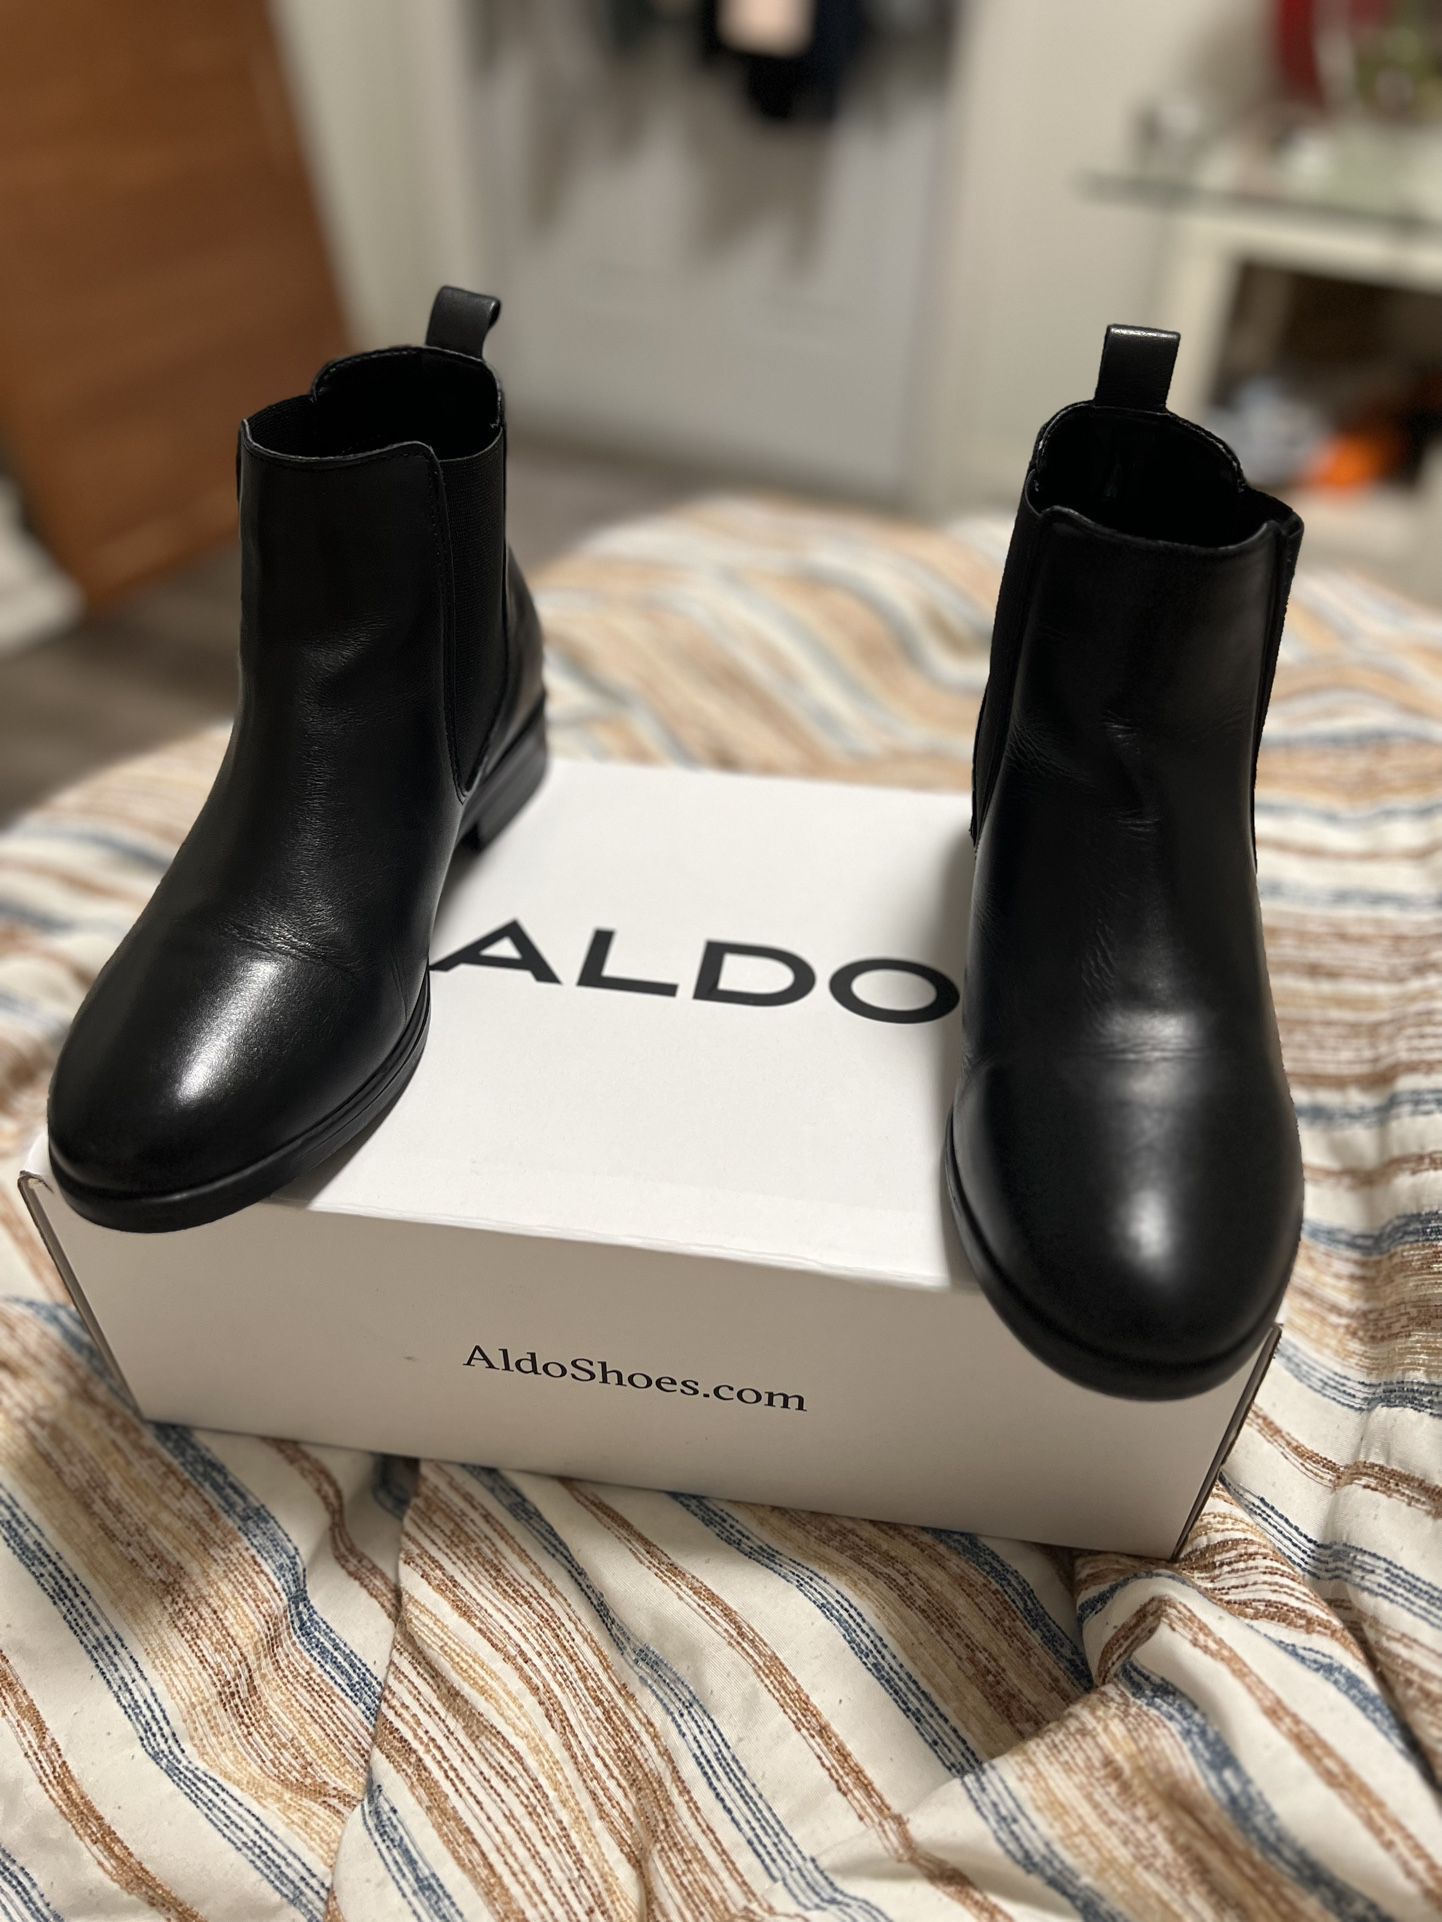 bagage søsyge propel Aldo Boots Size 6 for Sale in Miami, FL - OfferUp